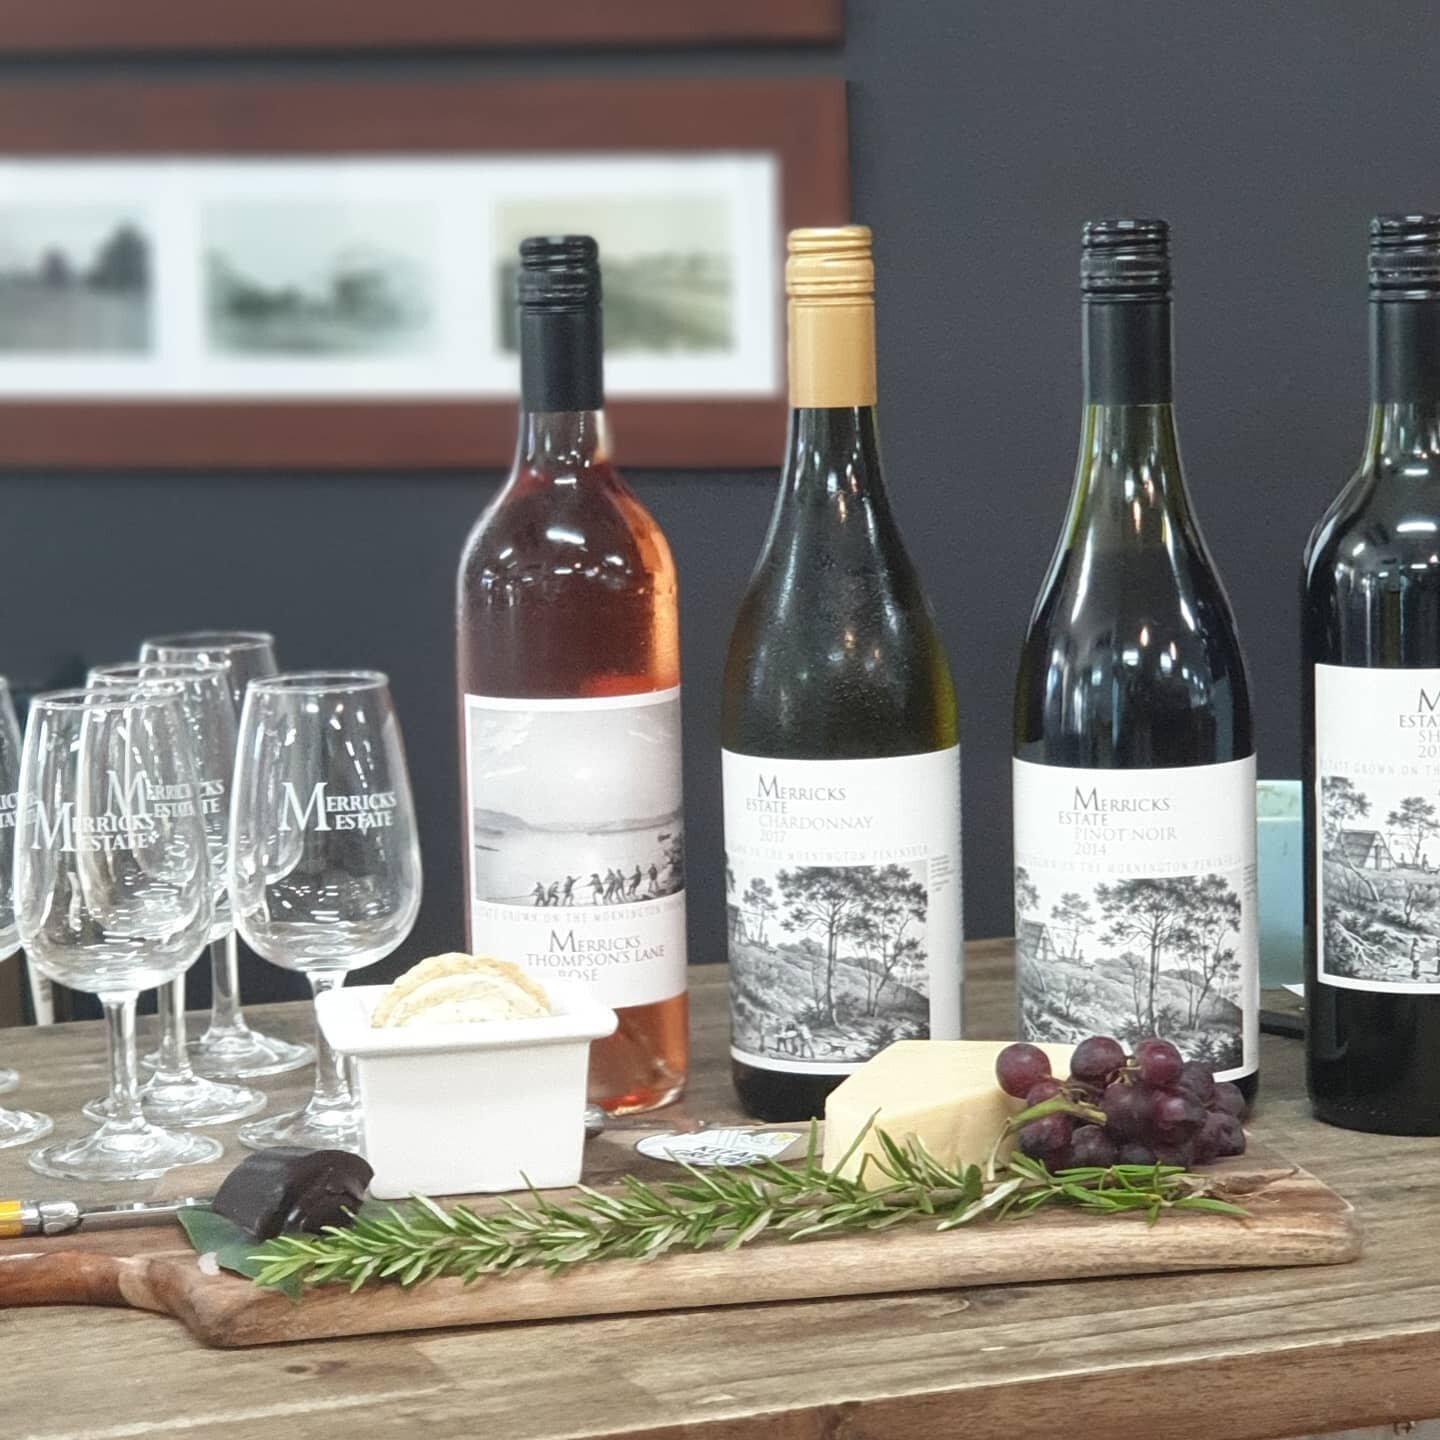 Mum might be in need of a quality Estate  Grown 100% Mornington Peninsula wine this Mother's Day. Especially after a week  of home schooling. From Chardonnay, Rose, Pinot, Shiraz and Cabernet.
#morningtonpeninsulawineries